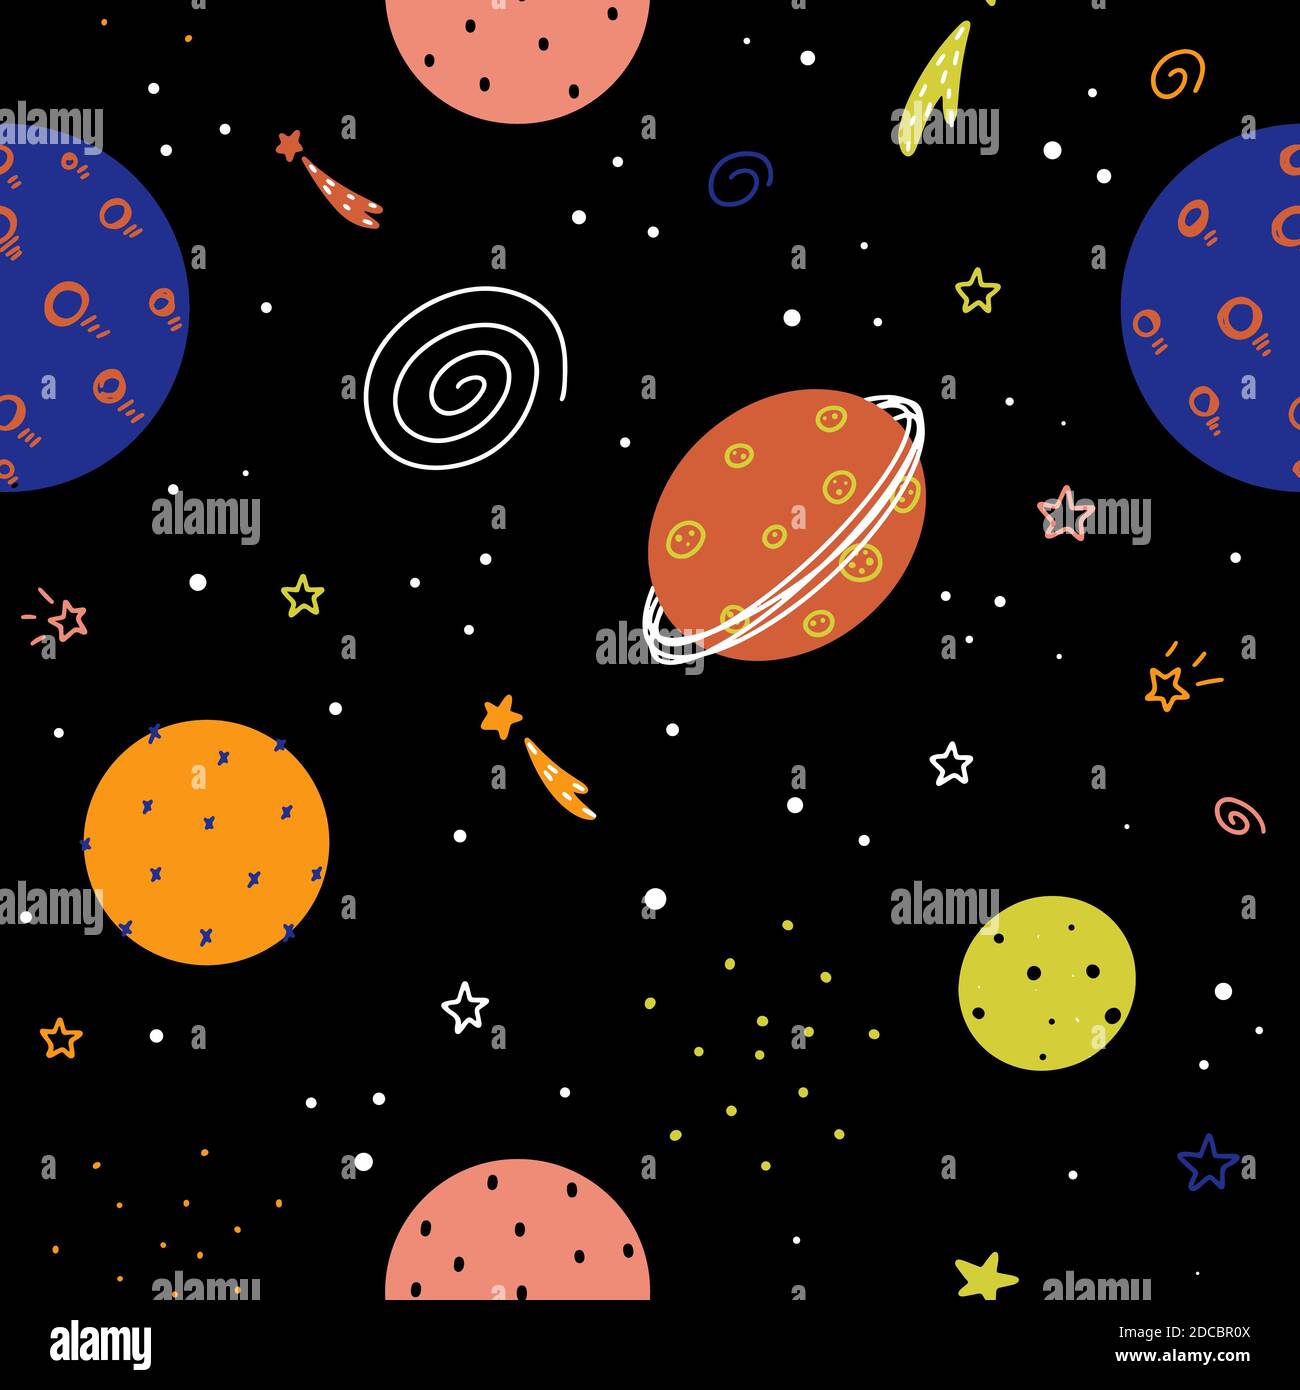 Cute nursery childish space seamless pattern with planets, stars, galaxies and abstract elements hand drawn in Scandinavian style vector illustration. Stock Vector